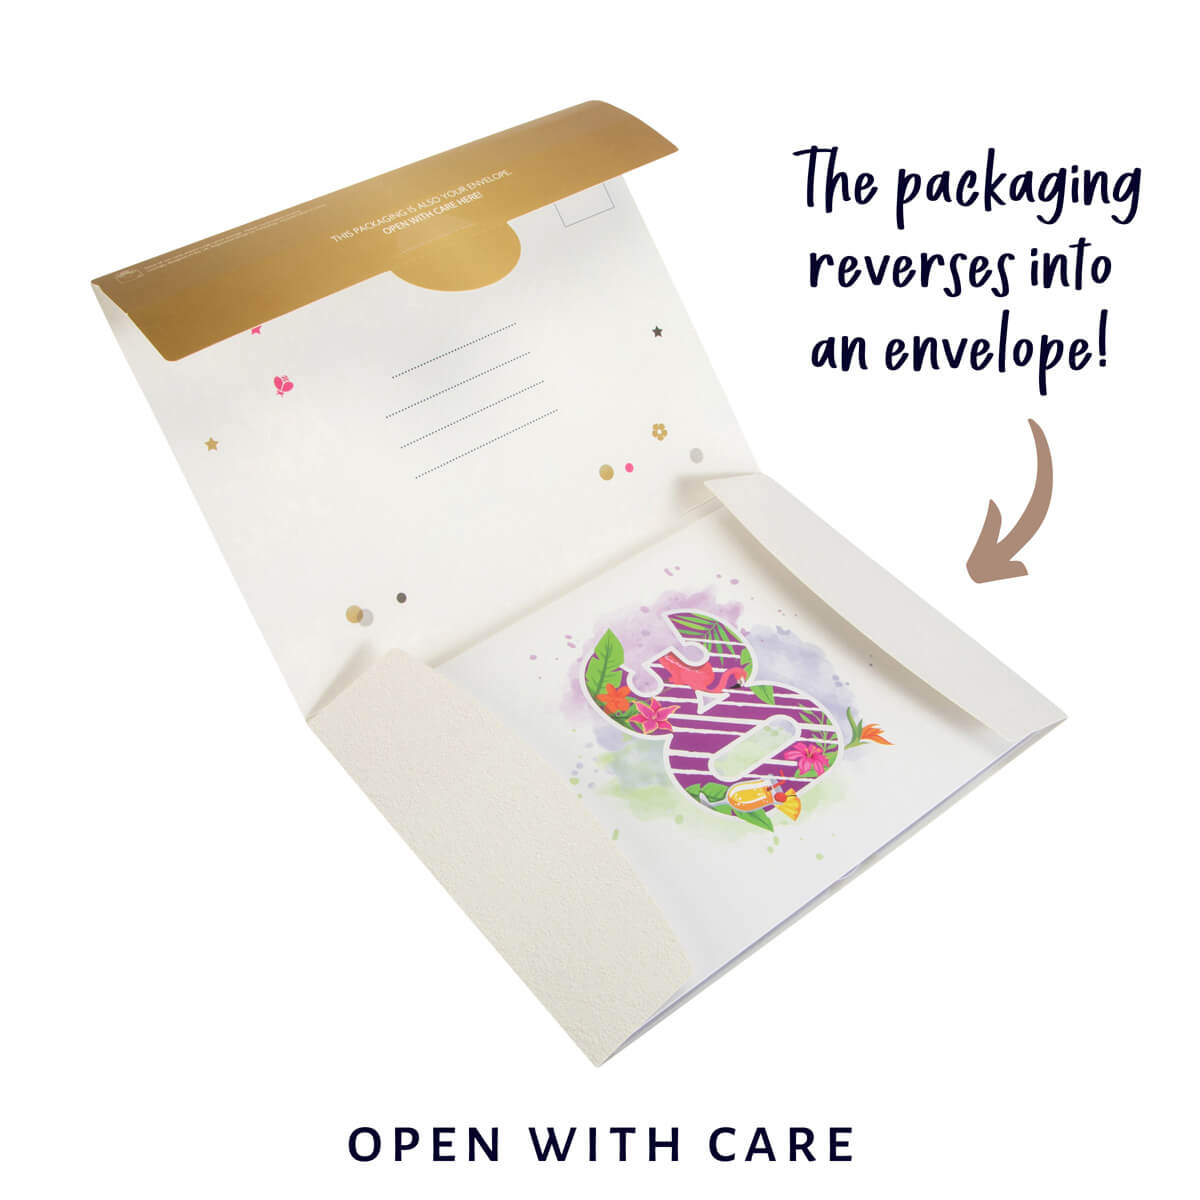 tropical 30th birthday pop up card reversible eco packaging that becomes a gifting envelope